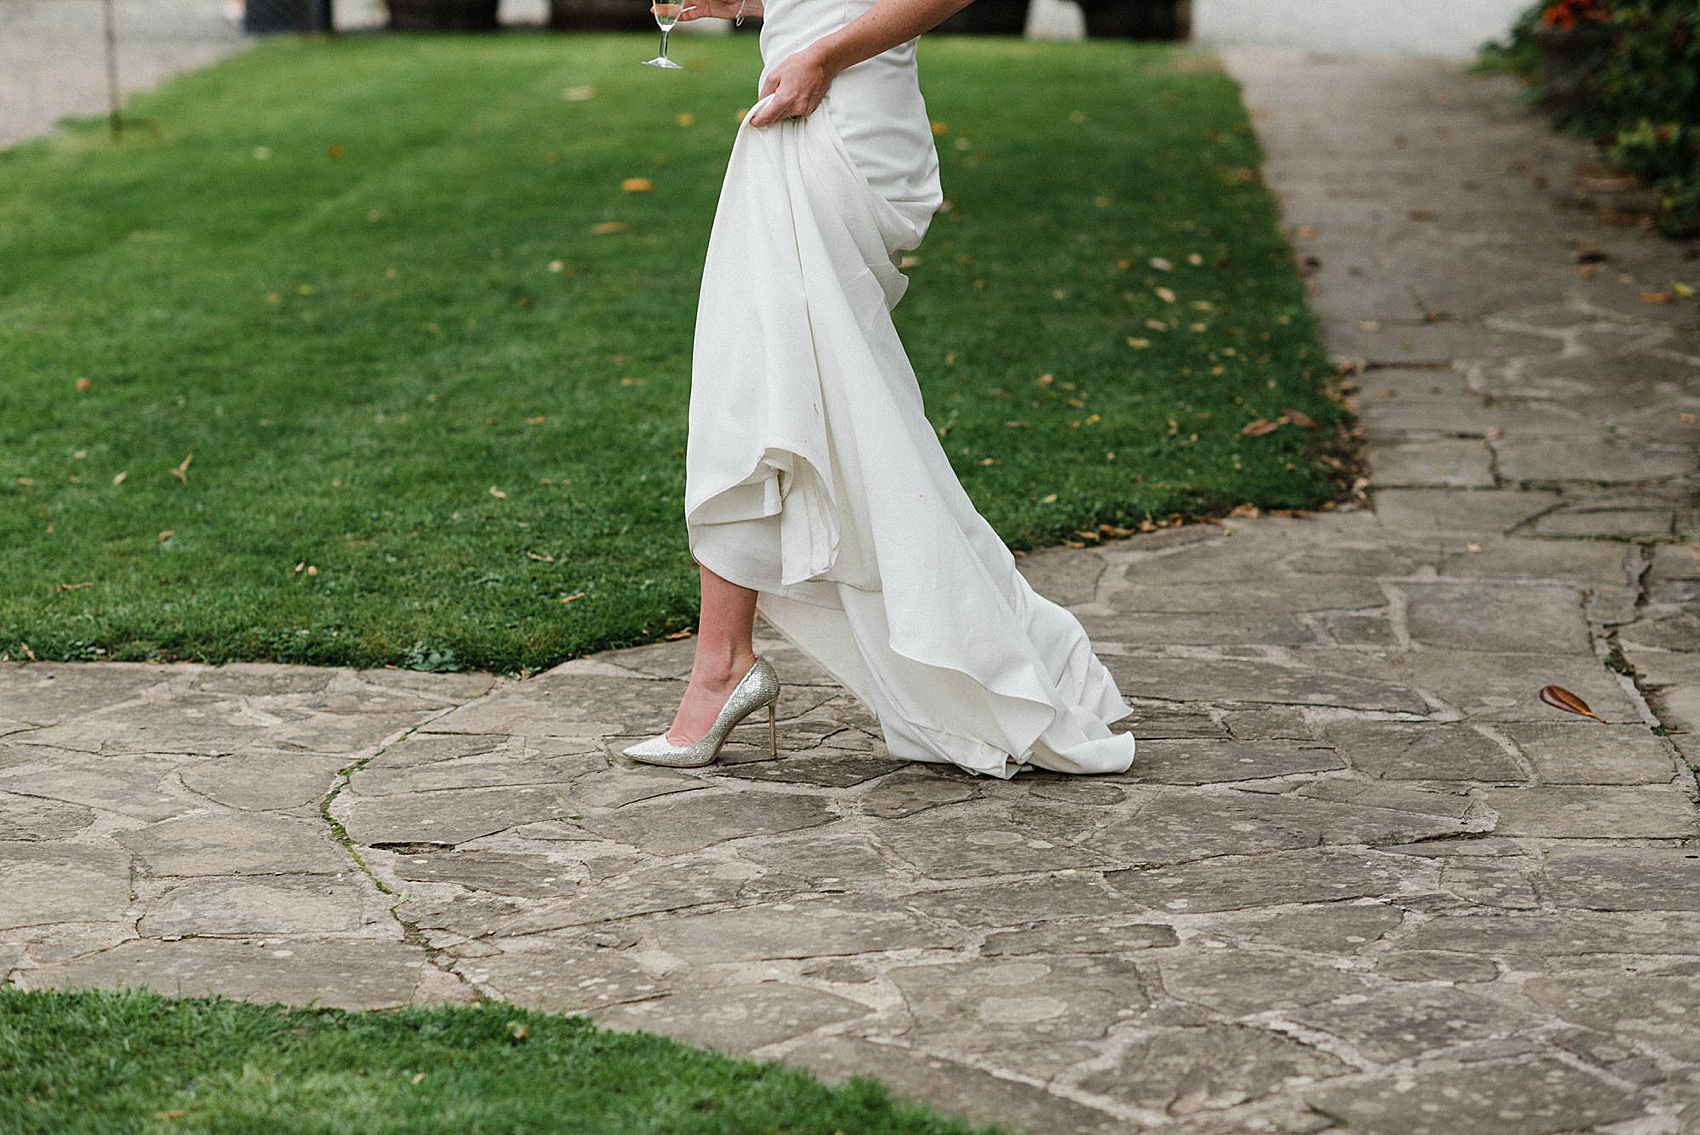 Pronovias cap sleeve dress Anglesey wedding  - Pronovias Elegance for a Modern, Coastal Country House Party Wedding on the Isle of Anglesey